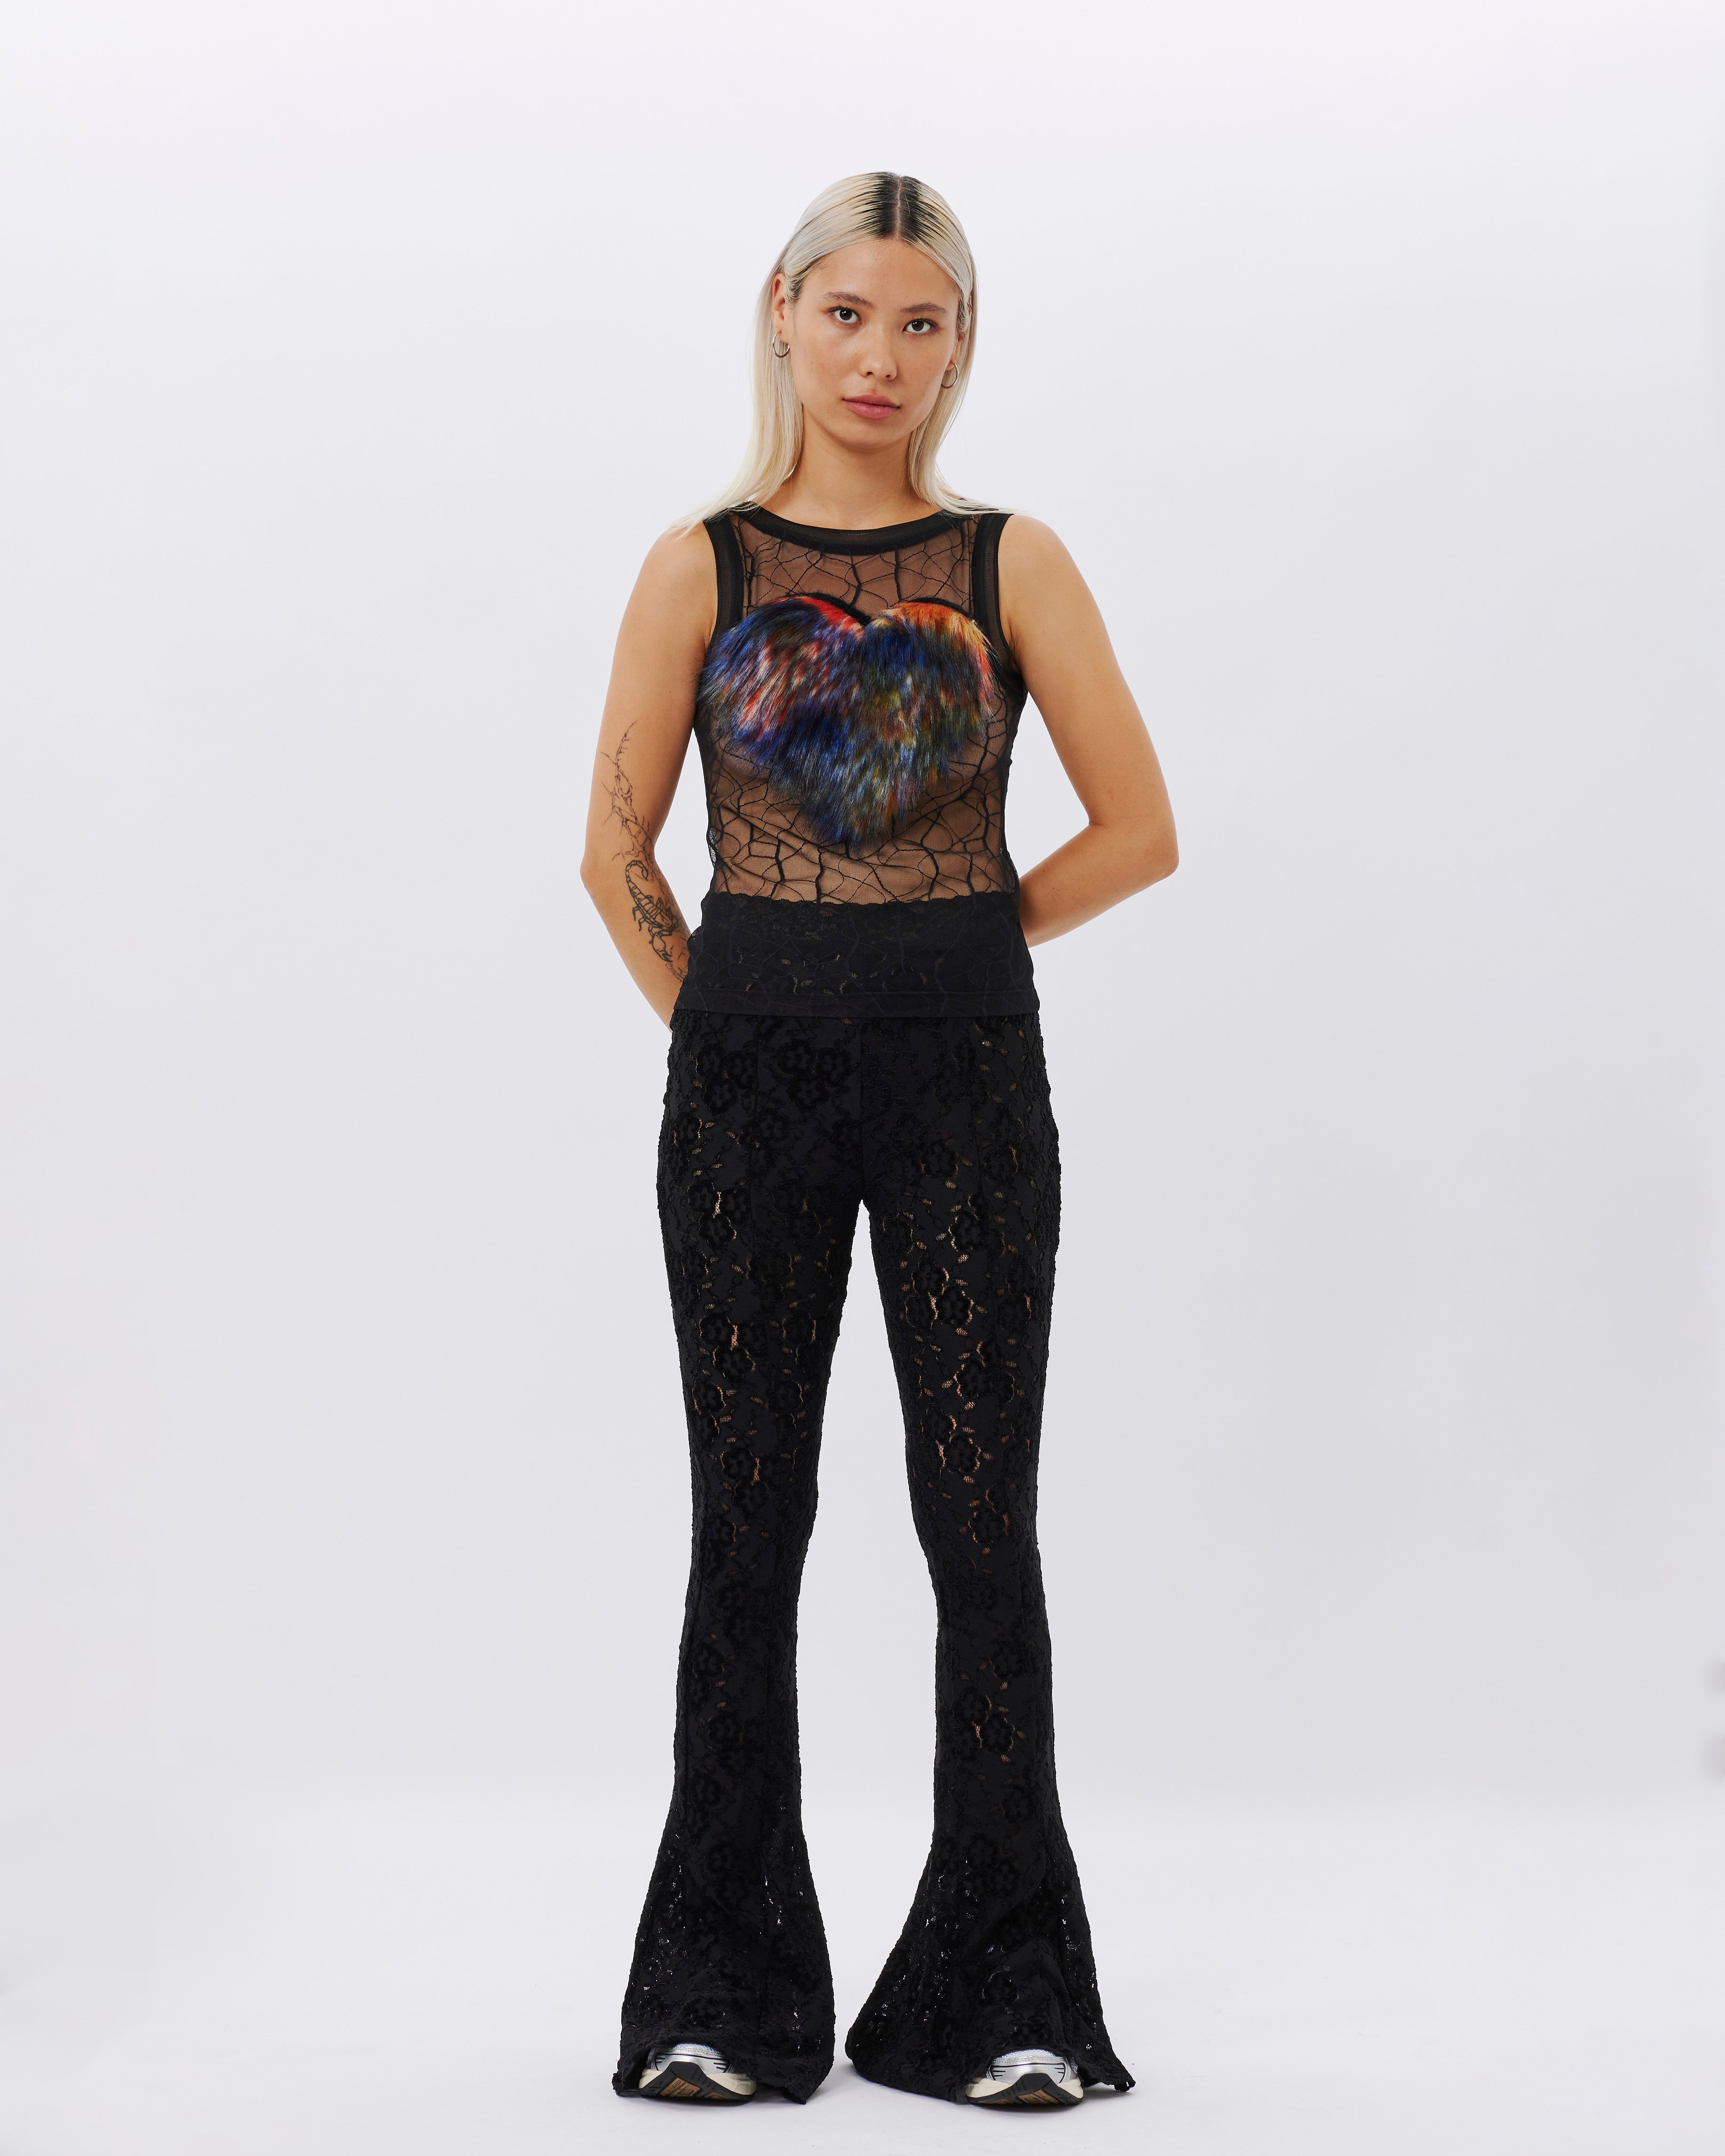 Andersson Bell See-Through Lace Bootcut Pants BLACK apa655w-BLK